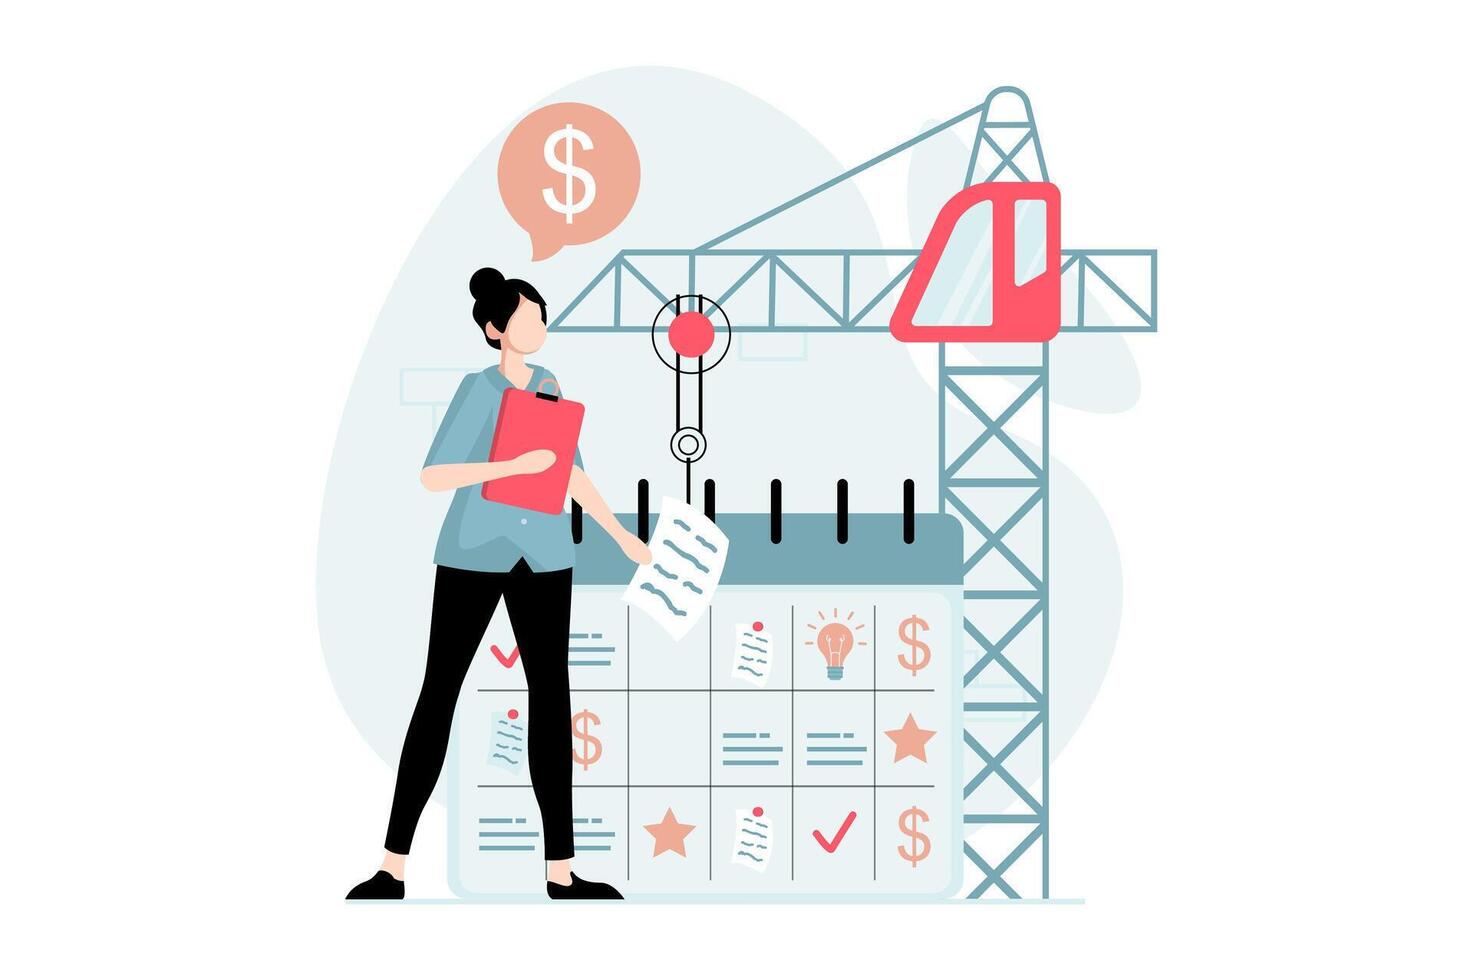 Business making concept with people scene in flat design. Woman planning strategy and work tasks, manages time and workflow, develops company. illustration with character situation for web vector